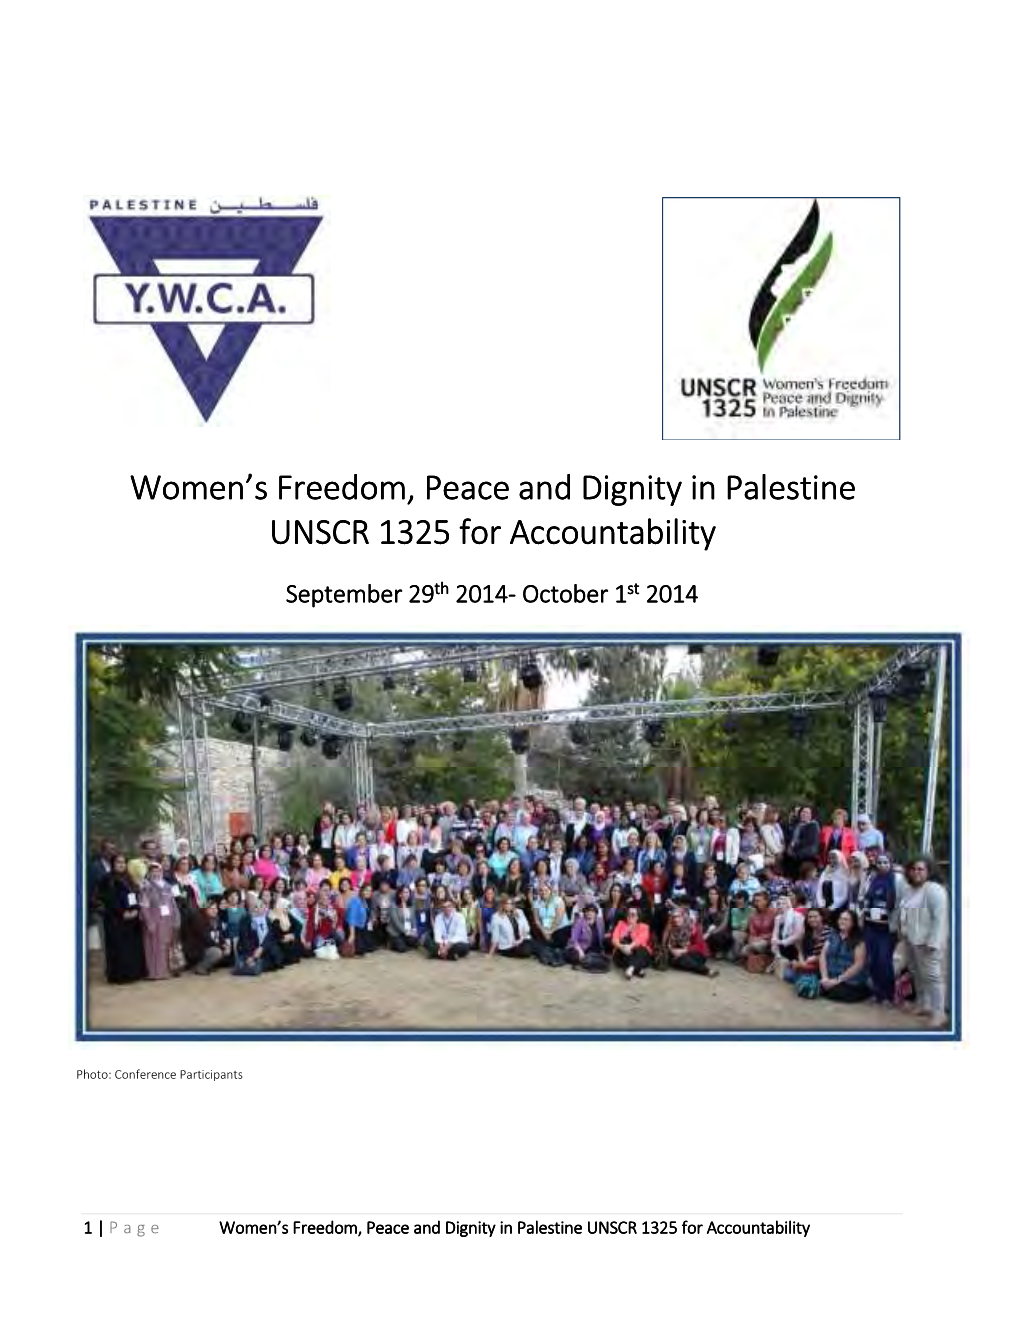 Women's Freedom, Peace and Dignity in Palestine Women's Freedom, Peace and Dignity in Palestine UNSCR 1325 for Accountabilit